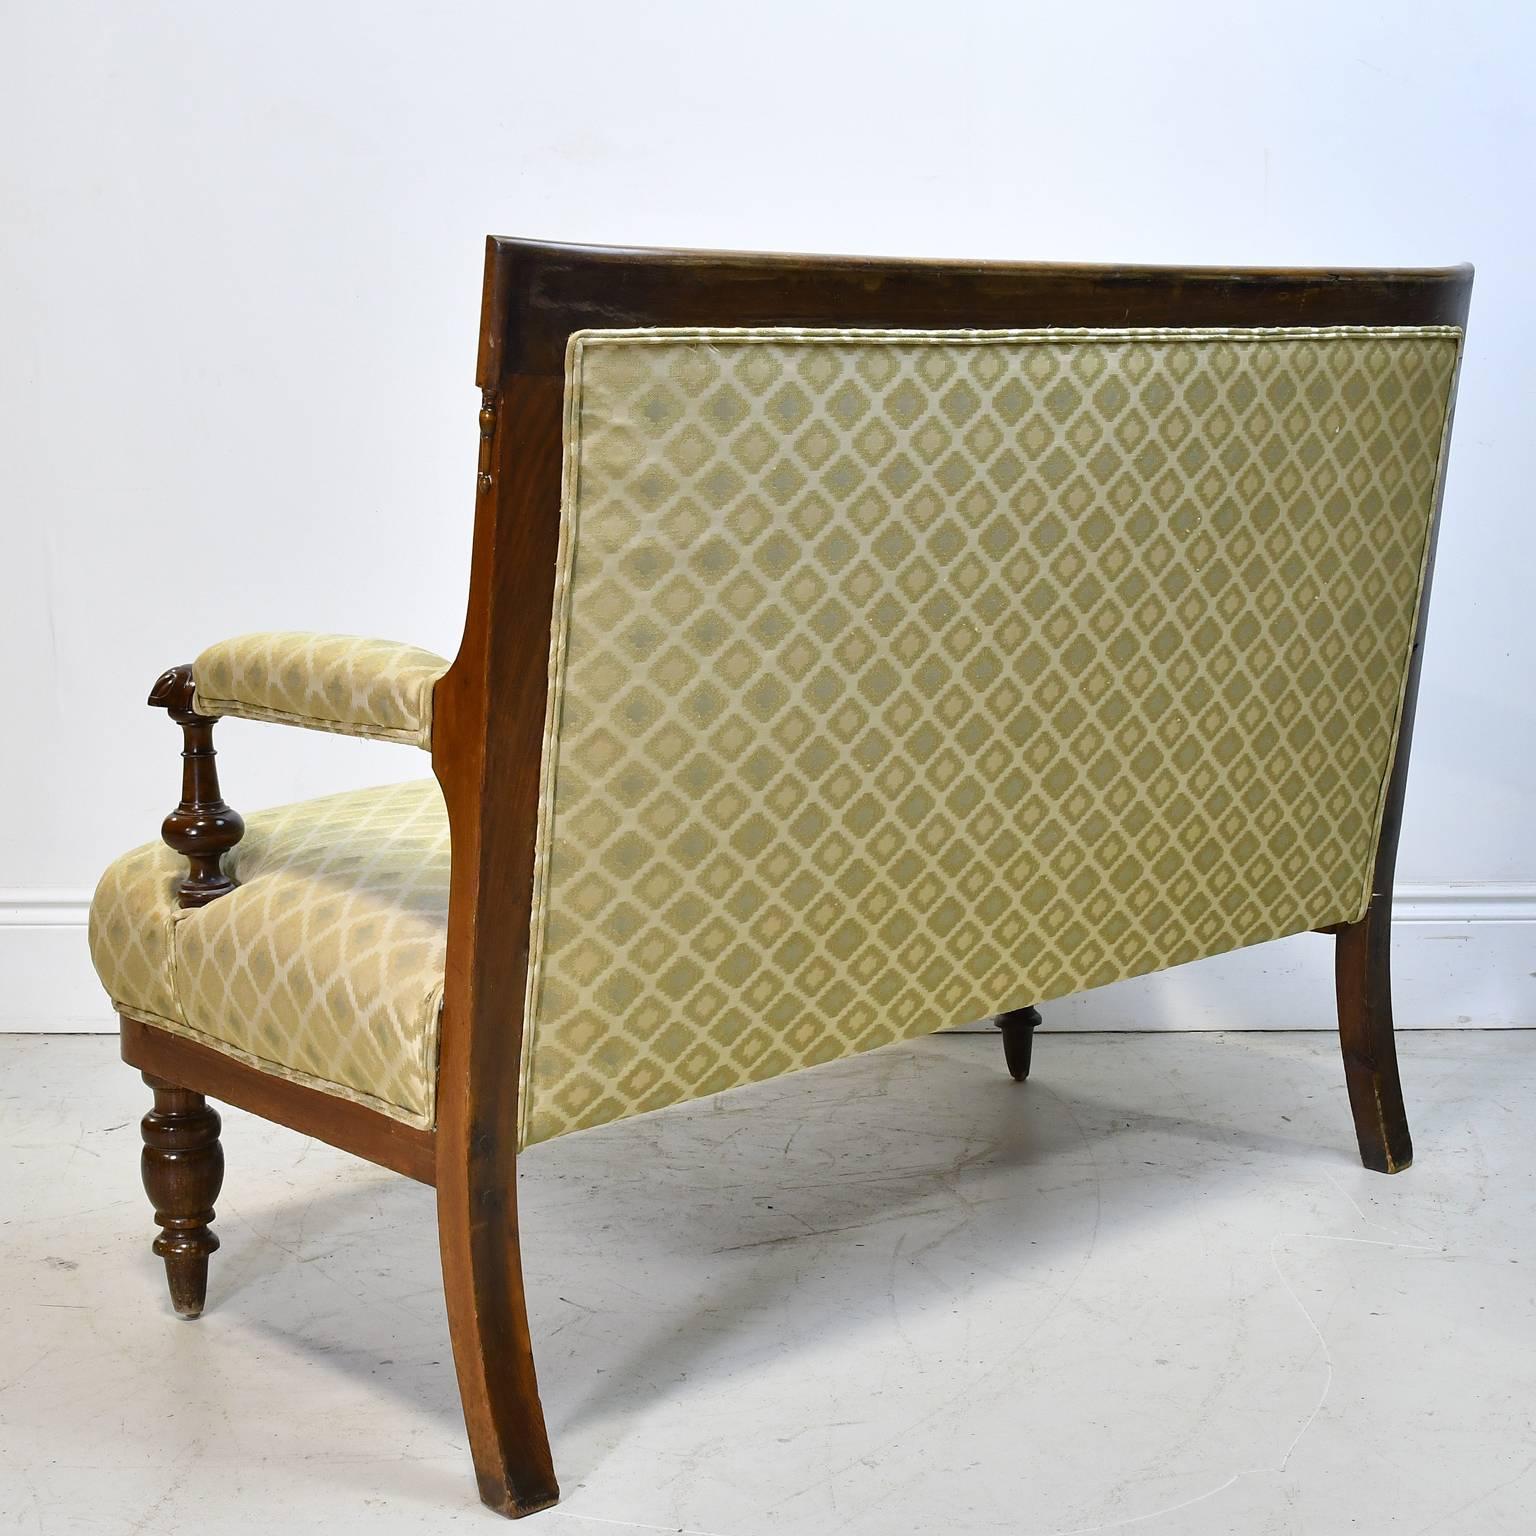 Hand-Carved 19th Century Danish Canapé Sofa Settee Loveseat in Walnut with Upholstery For Sale